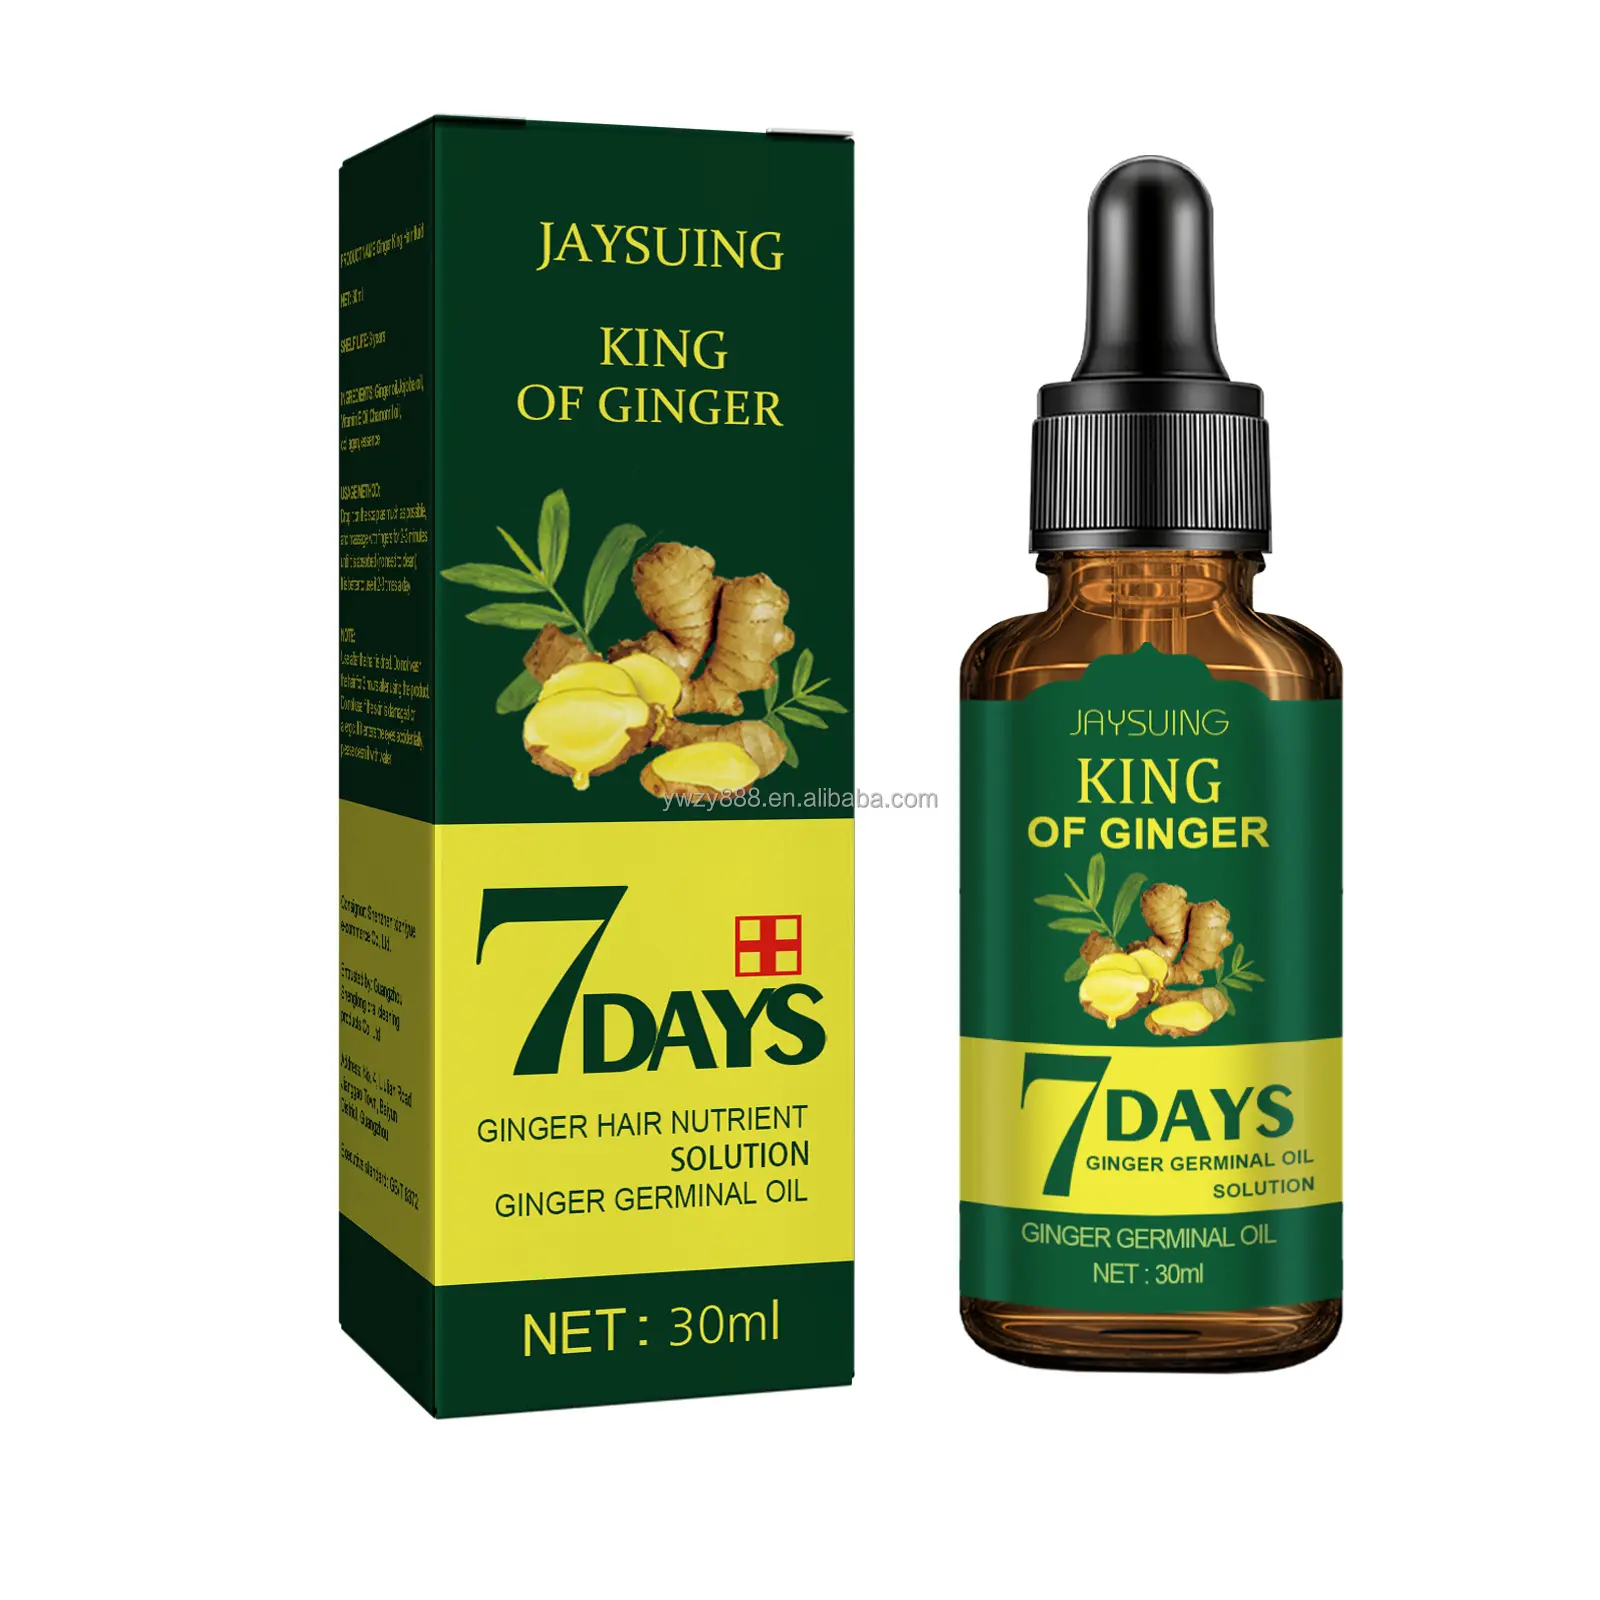 Jaysuing ginger hair care essential oil refreshing and nourishing scalp hair follicle nutrient solution strong and beautiful hai